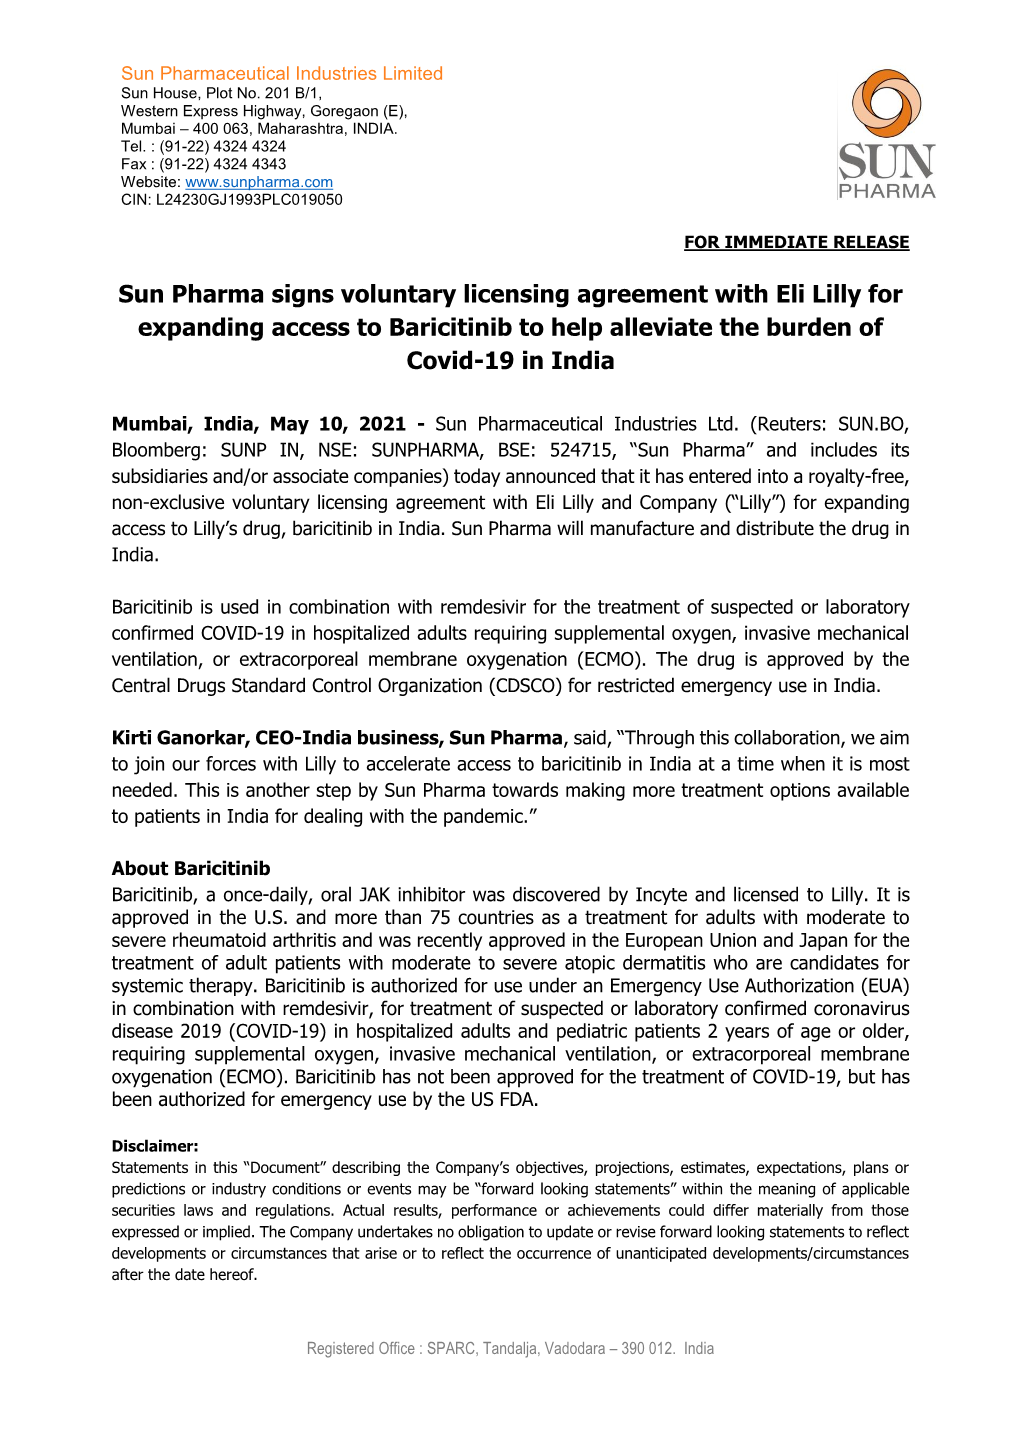 Sun Pharma Signs Voluntary Licensing Agreement with Eli Lilly for Expanding Access to Baricitinib to Help Alleviate the Burden of Covid-19 in India